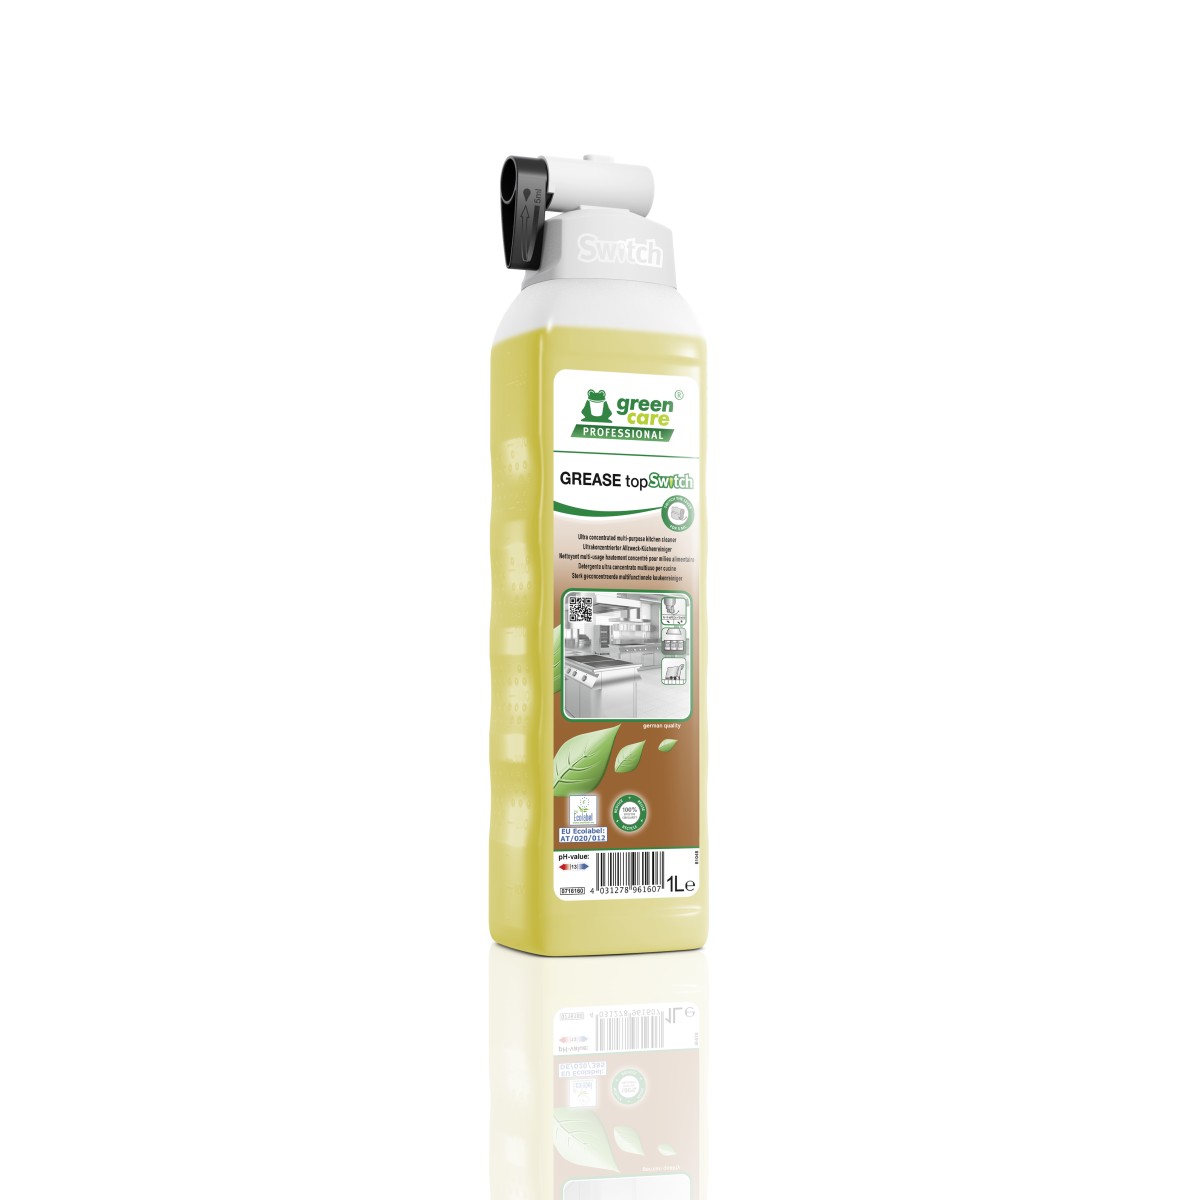 Tana Green Care Grease Topswitch, 1 liter